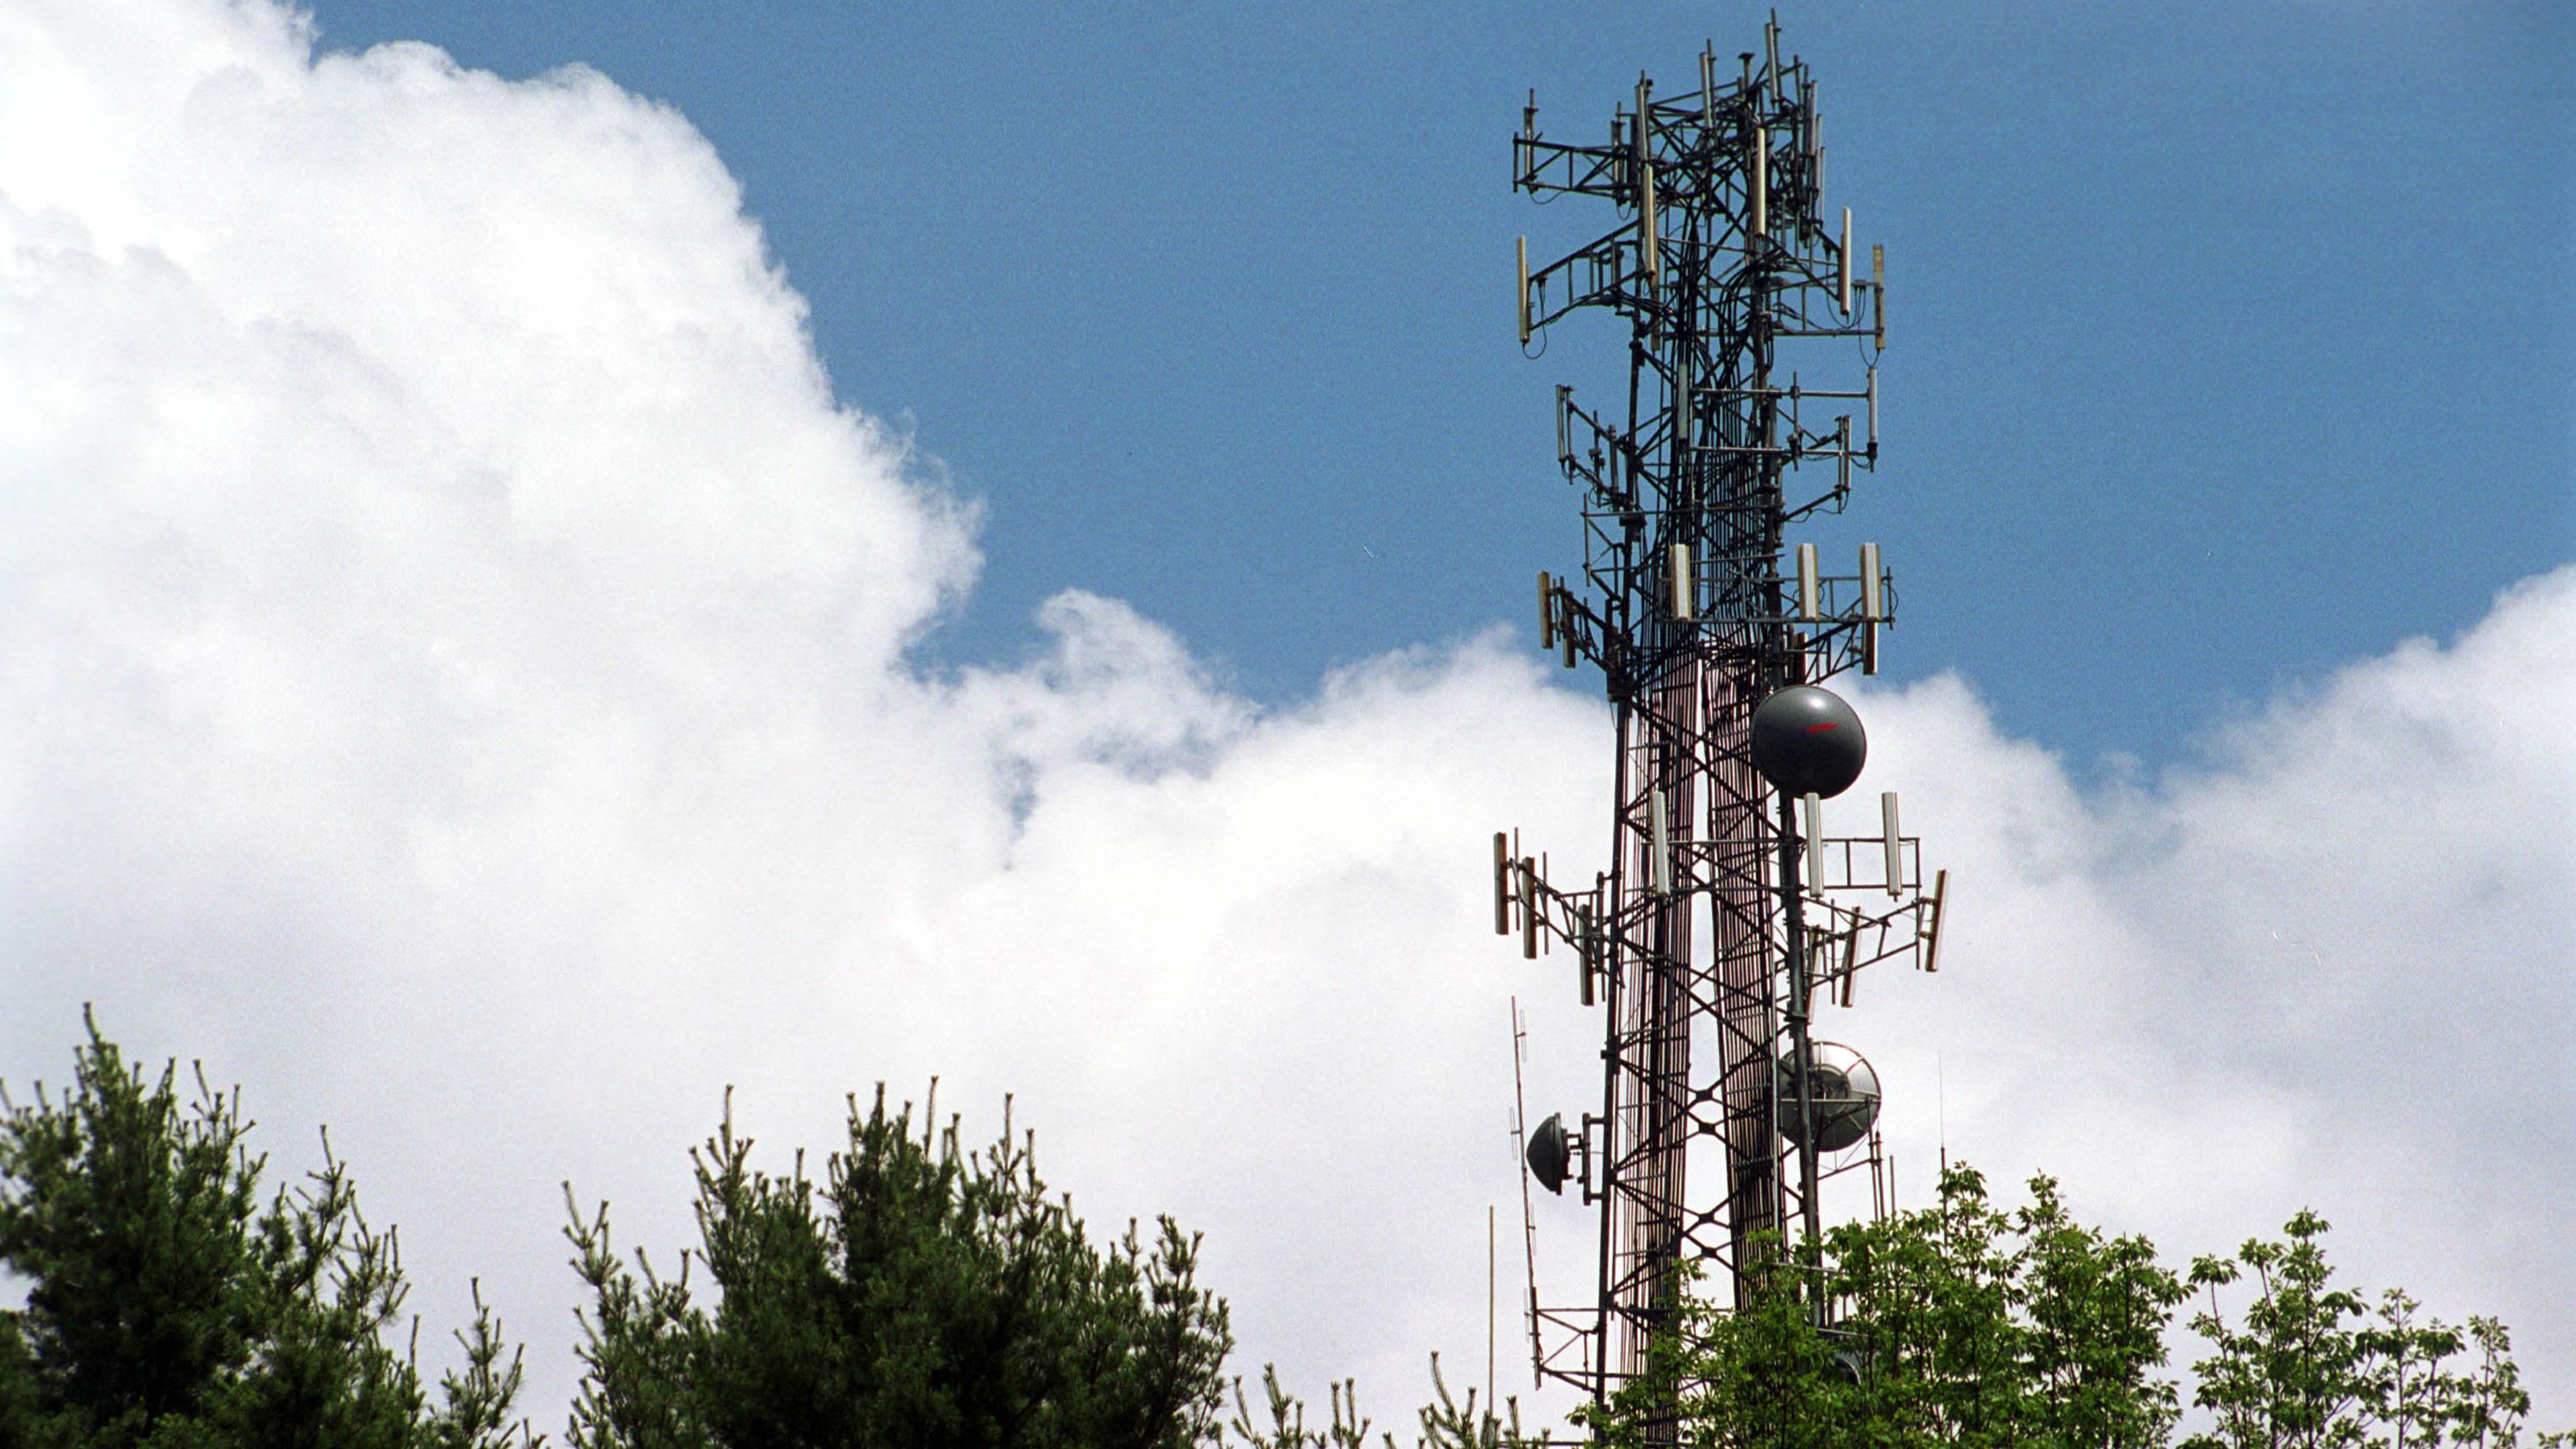 Police use Stingray devices to spoof cell phone towers like this one in Sudbury, Massachusetts.